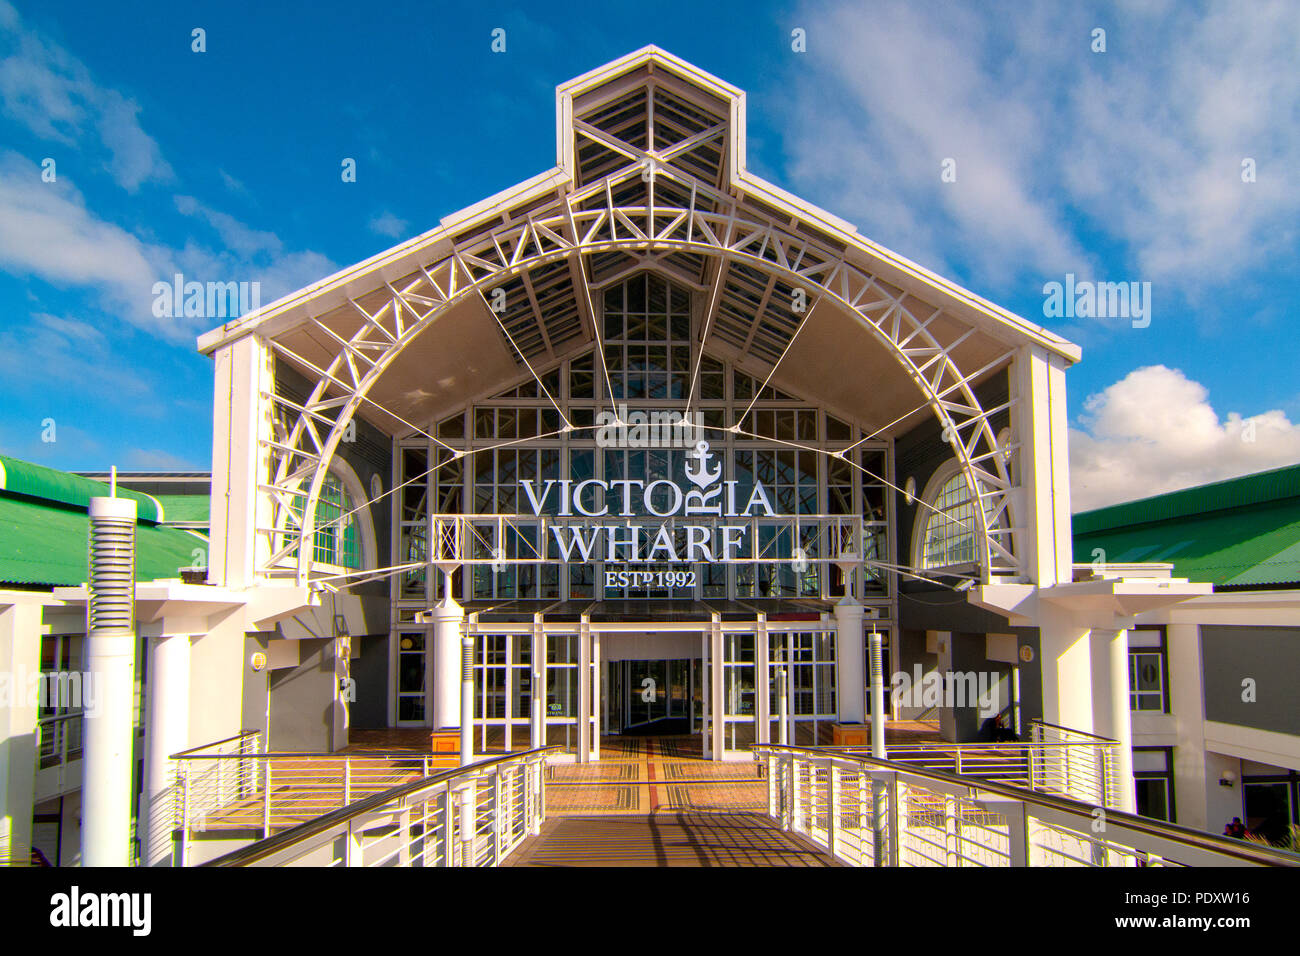 Entrance to the Victoria & Alfred Waterfront, Cape Town, South Africa Stock Photo